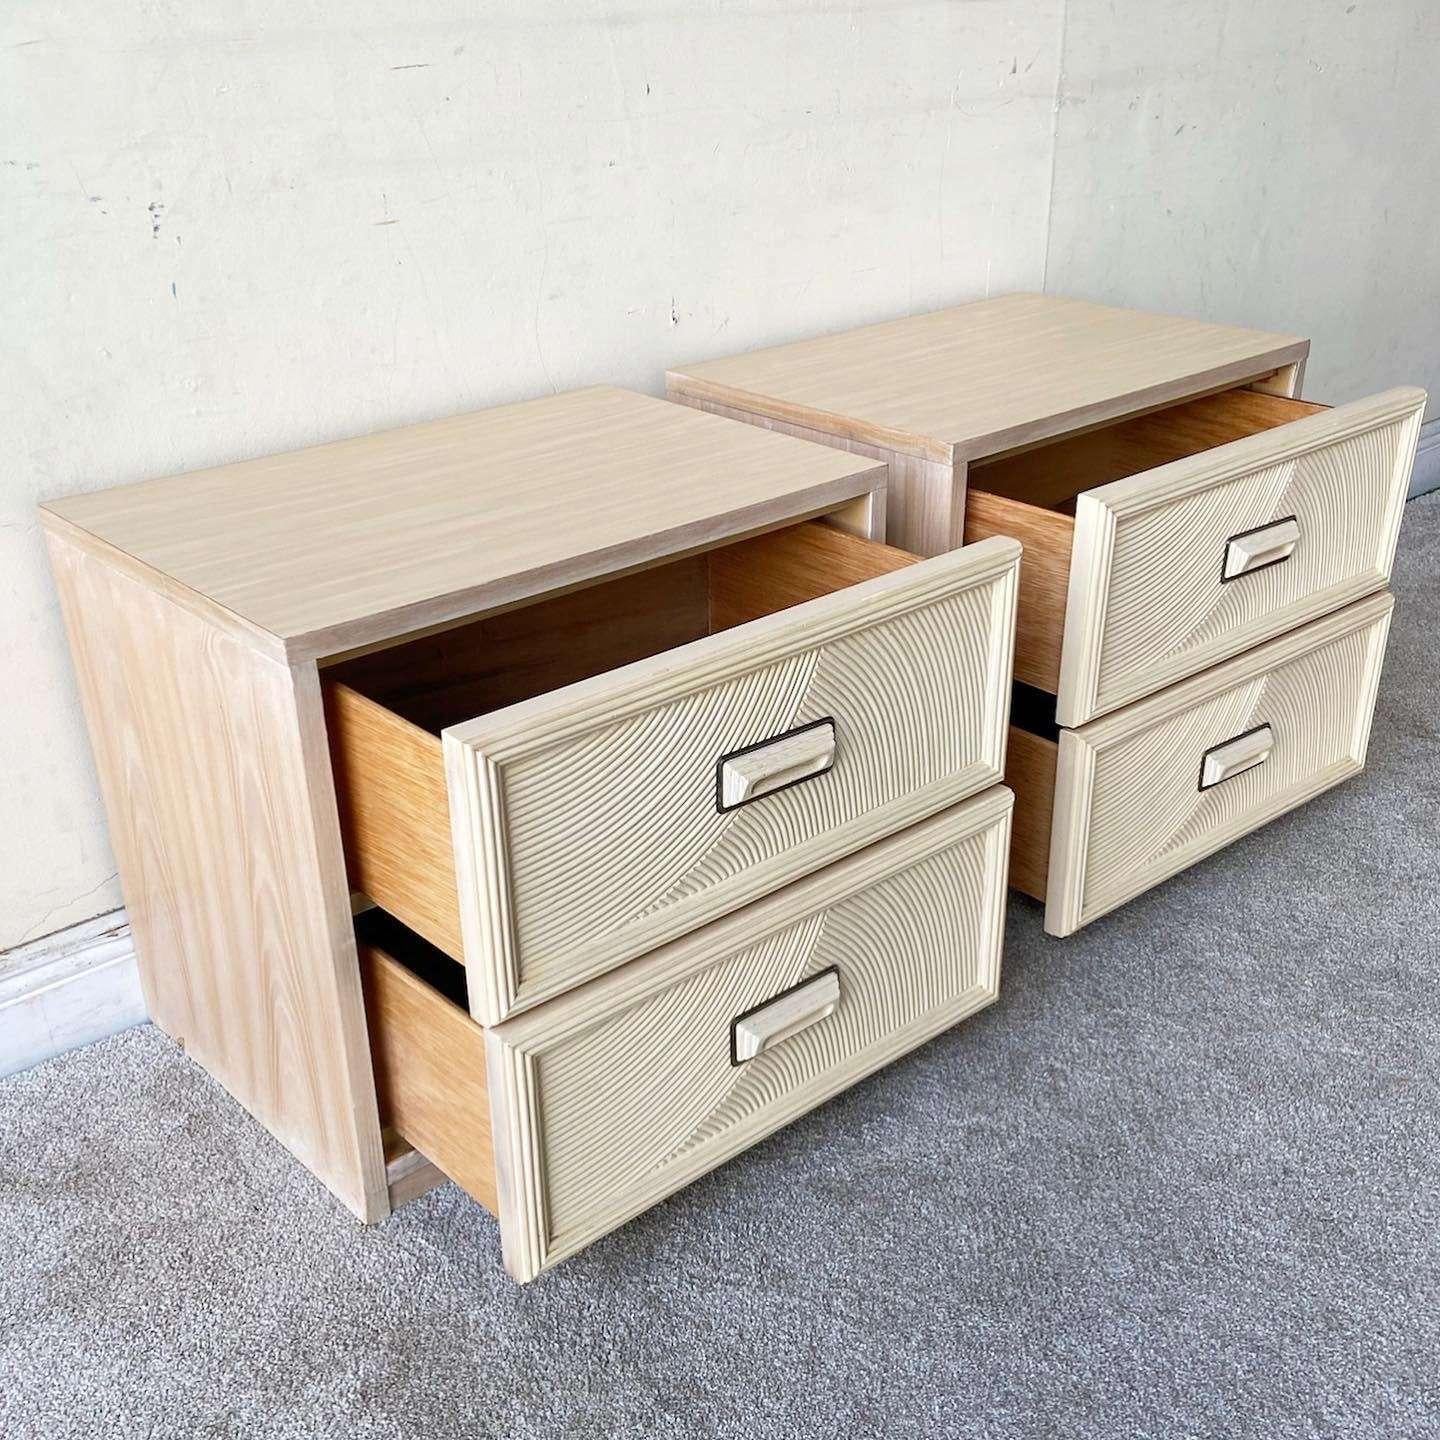 Amazing pair of vintage boho chic nightstands by Henry Link. Each features 2 spacious drawers with pencil reed drawer faces.